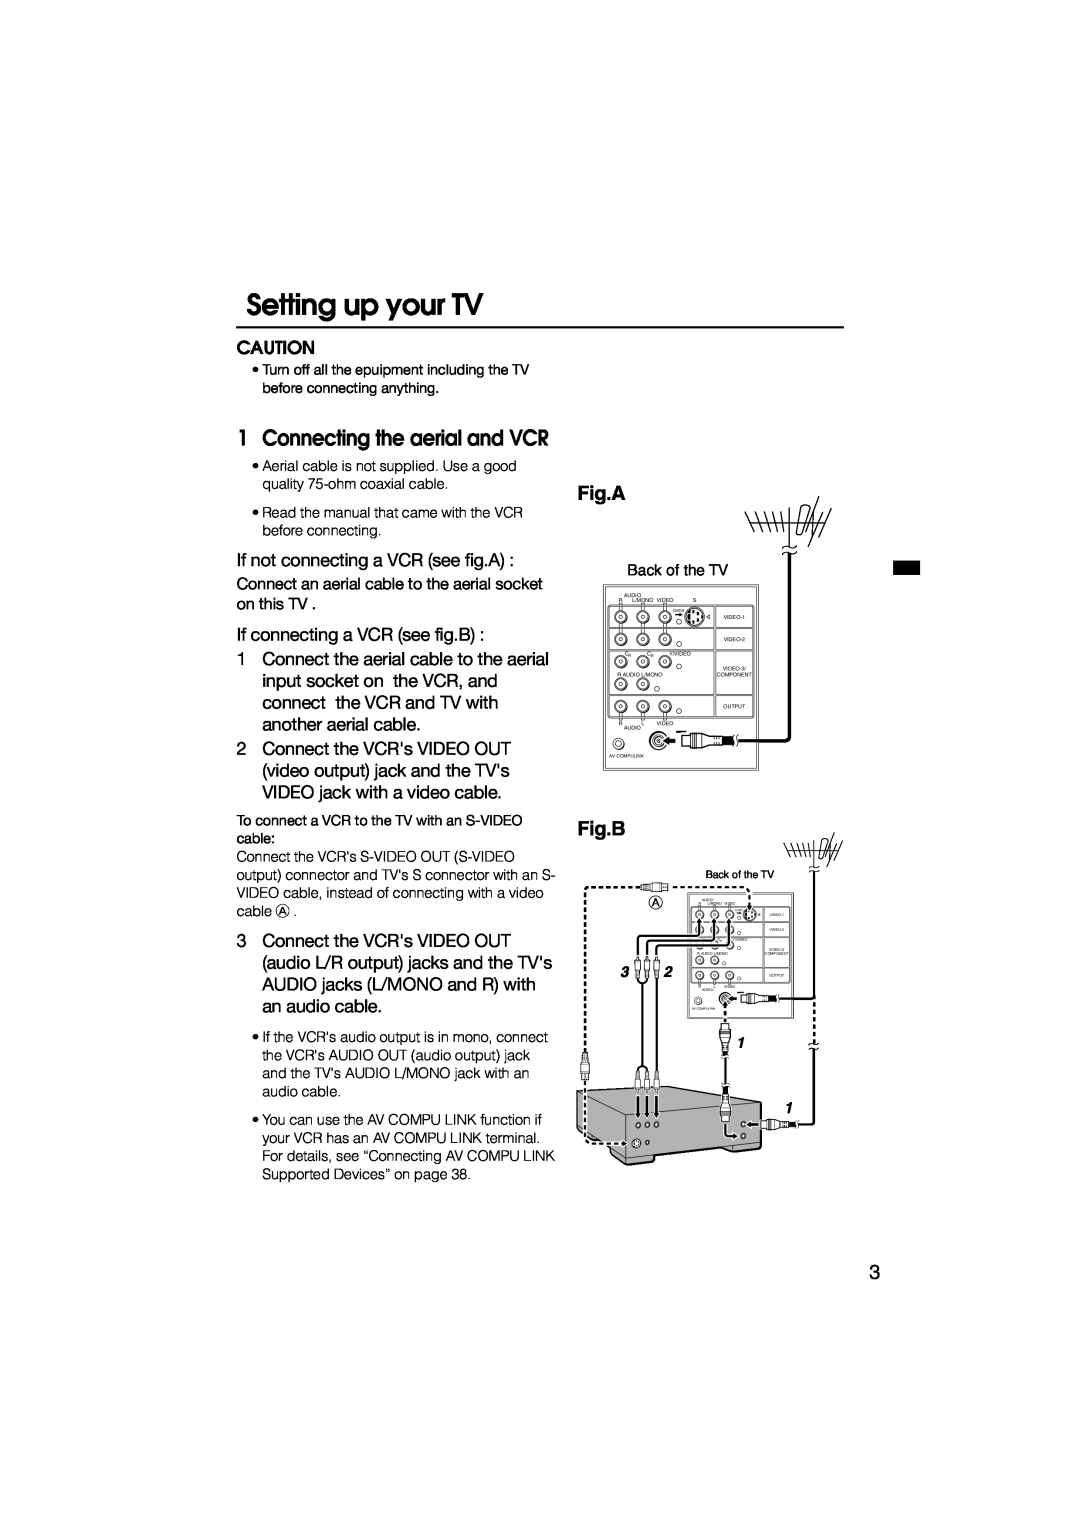 JVC HV-L29PRO, HV-L34PRO manual Setting up your TV, Connecting the aerial and VCR, Fig.A, Fig.B 